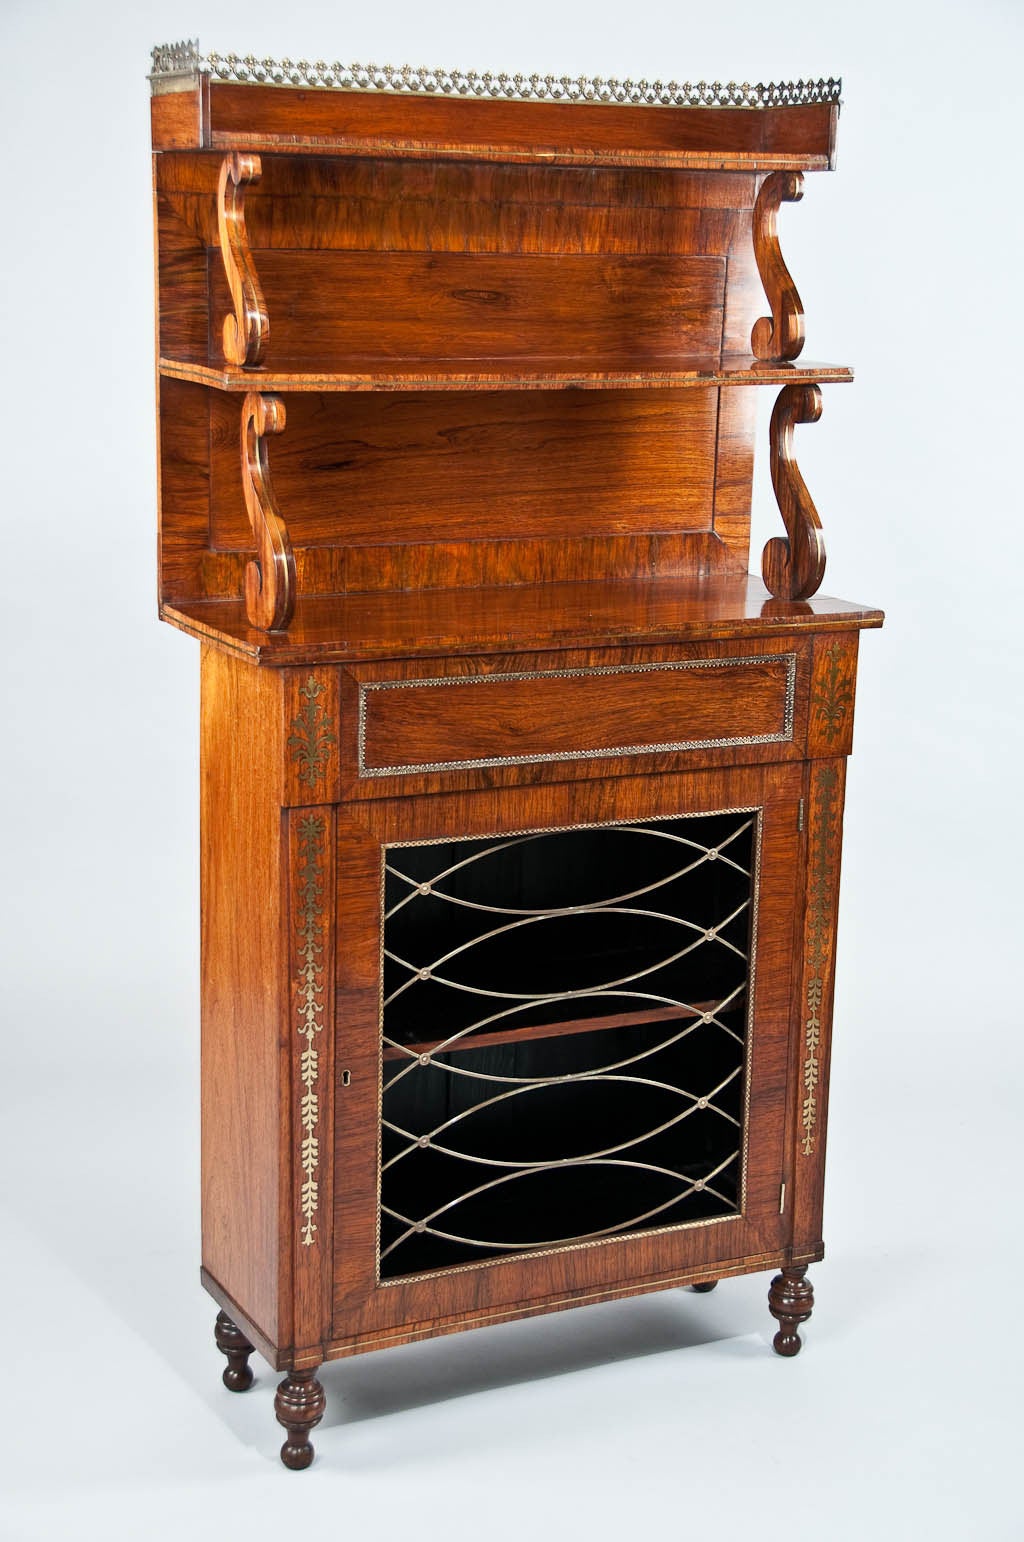 A stunning quality Regency antique rosewood and brass inlaid chiffonier with two-tier upstand. This fine quality Regency chiffonier decorated with brass inlay has a two-tier upstand supported by brass strung 's' shaped scrolls having a brass fretted